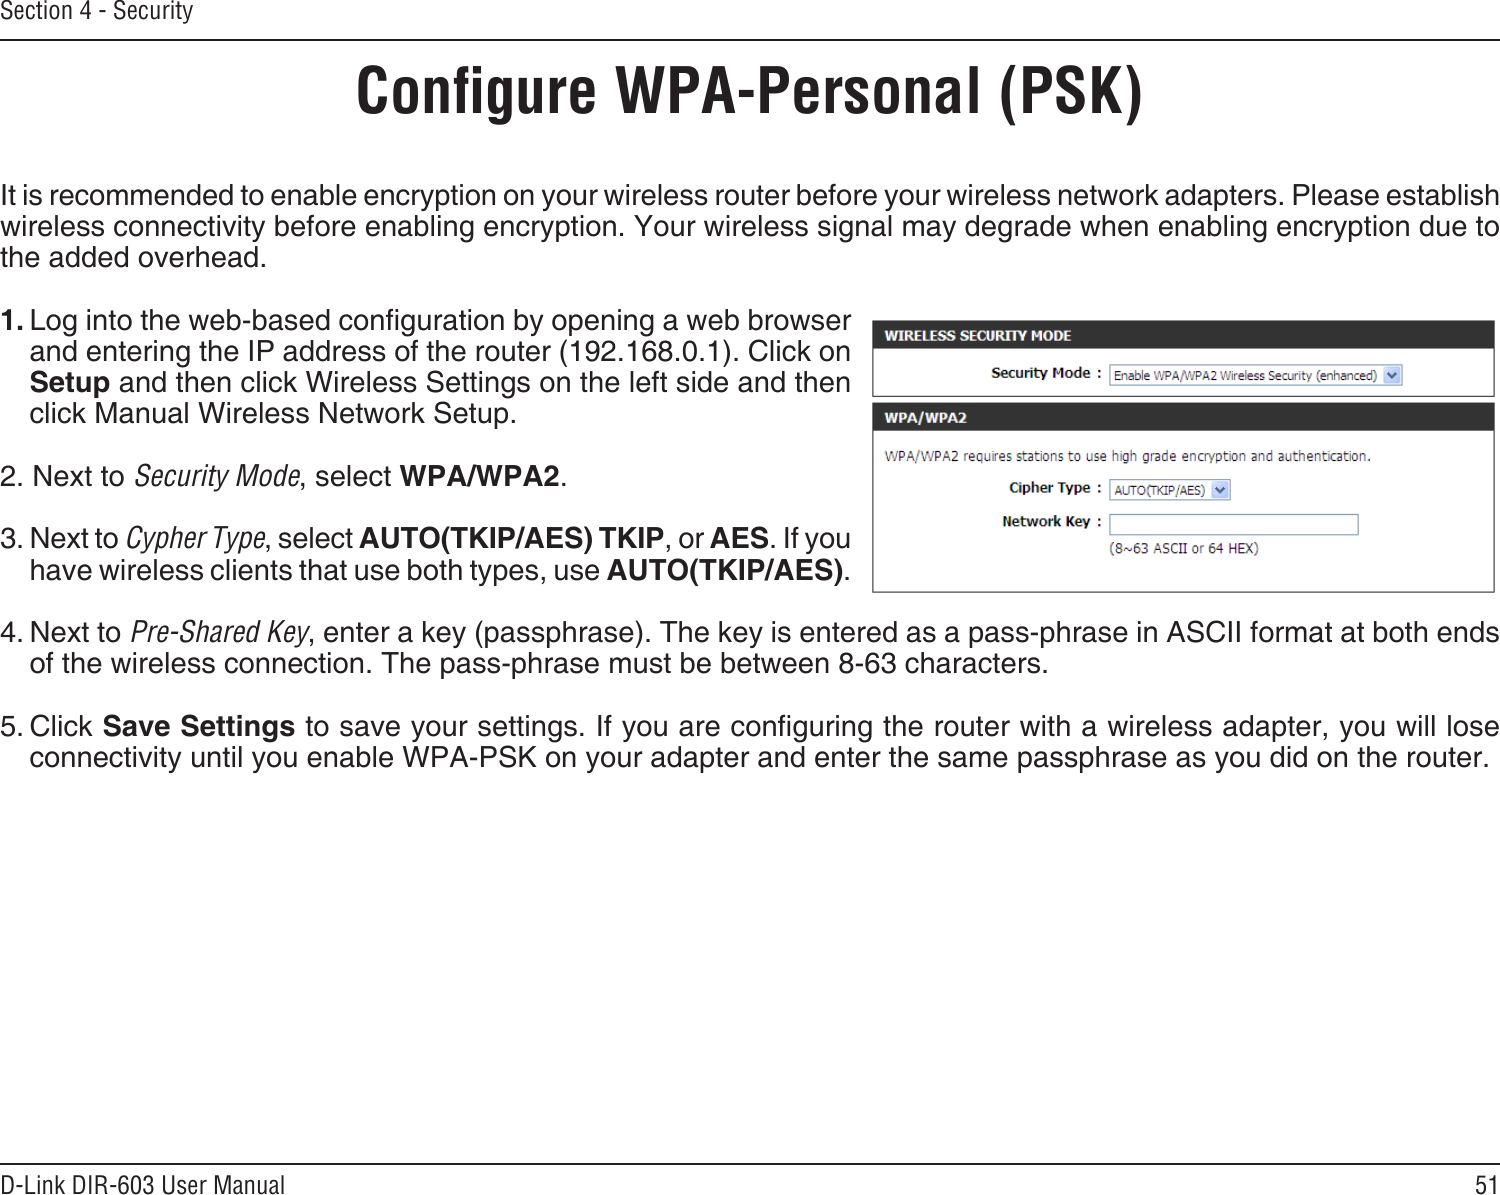 51D-Link DIR-603 User ManualSection 4 - SecurityCongure WPA-Personal (PSK)It is recommended to enable encryption on your wireless router before your wireless network adapters. Please establish wireless connectivity before enabling encryption. Your wireless signal may degrade when enabling encryption due to the added overhead.1. Log into the web-based conguration by opening a web browser and entering the IP address of the router (192.168.0.1). Click on Setup and then click Wireless Settings on the left side and then click Manual Wireless Network Setup.2. Next to Security Mode, select WPA/WPA2.3. Next to Cypher Type, select AUTO(TKIP/AES) TKIP, or AES. If you have wireless clients that use both types, use AUTO(TKIP/AES).4. Next to Pre-Shared Key, enter a key (passphrase). The key is entered as a pass-phrase in ASCII format at both ends of the wireless connection. The pass-phrase must be between 8-63 characters. 5. Click Save Settings to save your settings. If you are conguring the router with a wireless adapter, you will lose connectivity until you enable WPA-PSK on your adapter and enter the same passphrase as you did on the router.